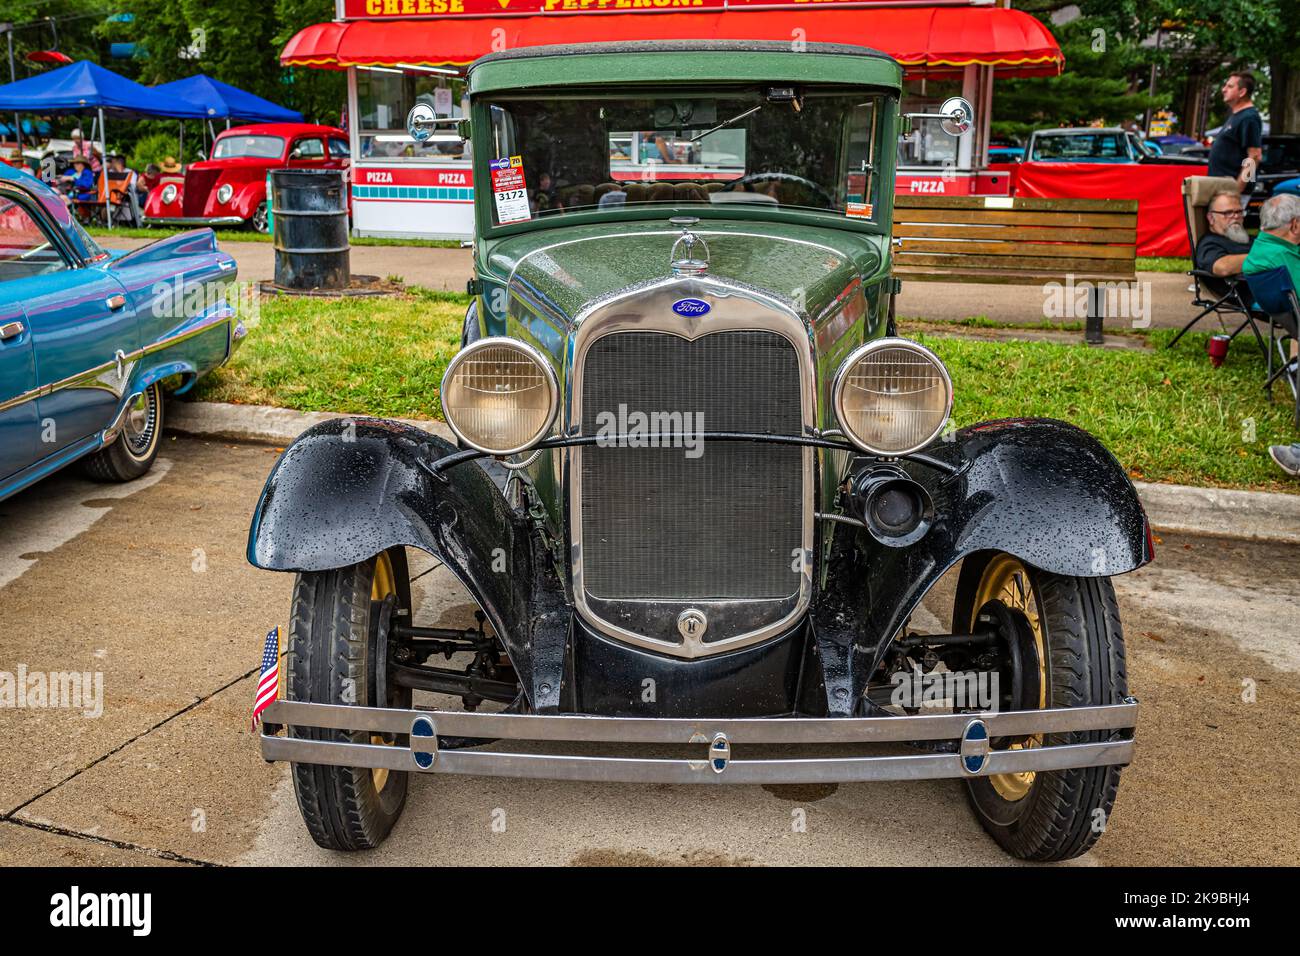 Des Moines, IA - July 01, 2022: High perspective front view of a 1930 Ford Model A Tudor Sedan at a local car show. Stock Photo